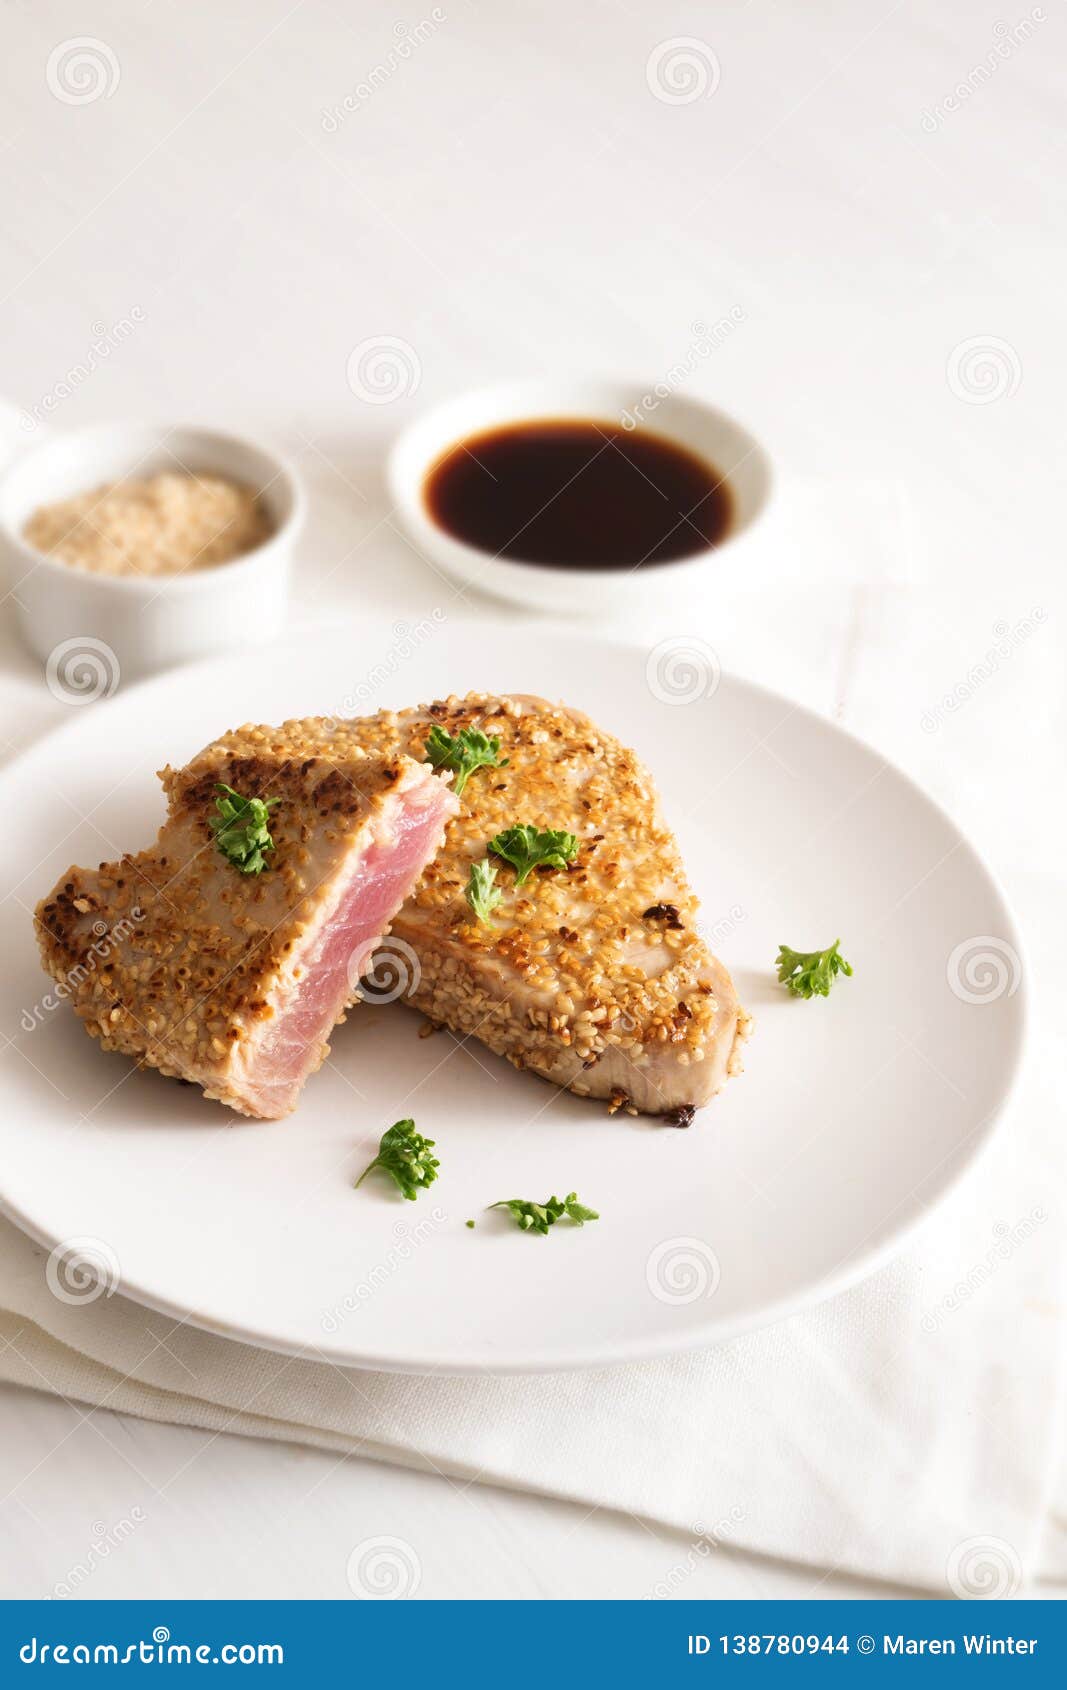 Roasted Tuna Steak In Sesame Seeds With Soy Sauce On A Plate On A White Table Copy Space Vertical Stock Photo Image Of Cuisine Carb 138780944,Fontina Mornay Sauce